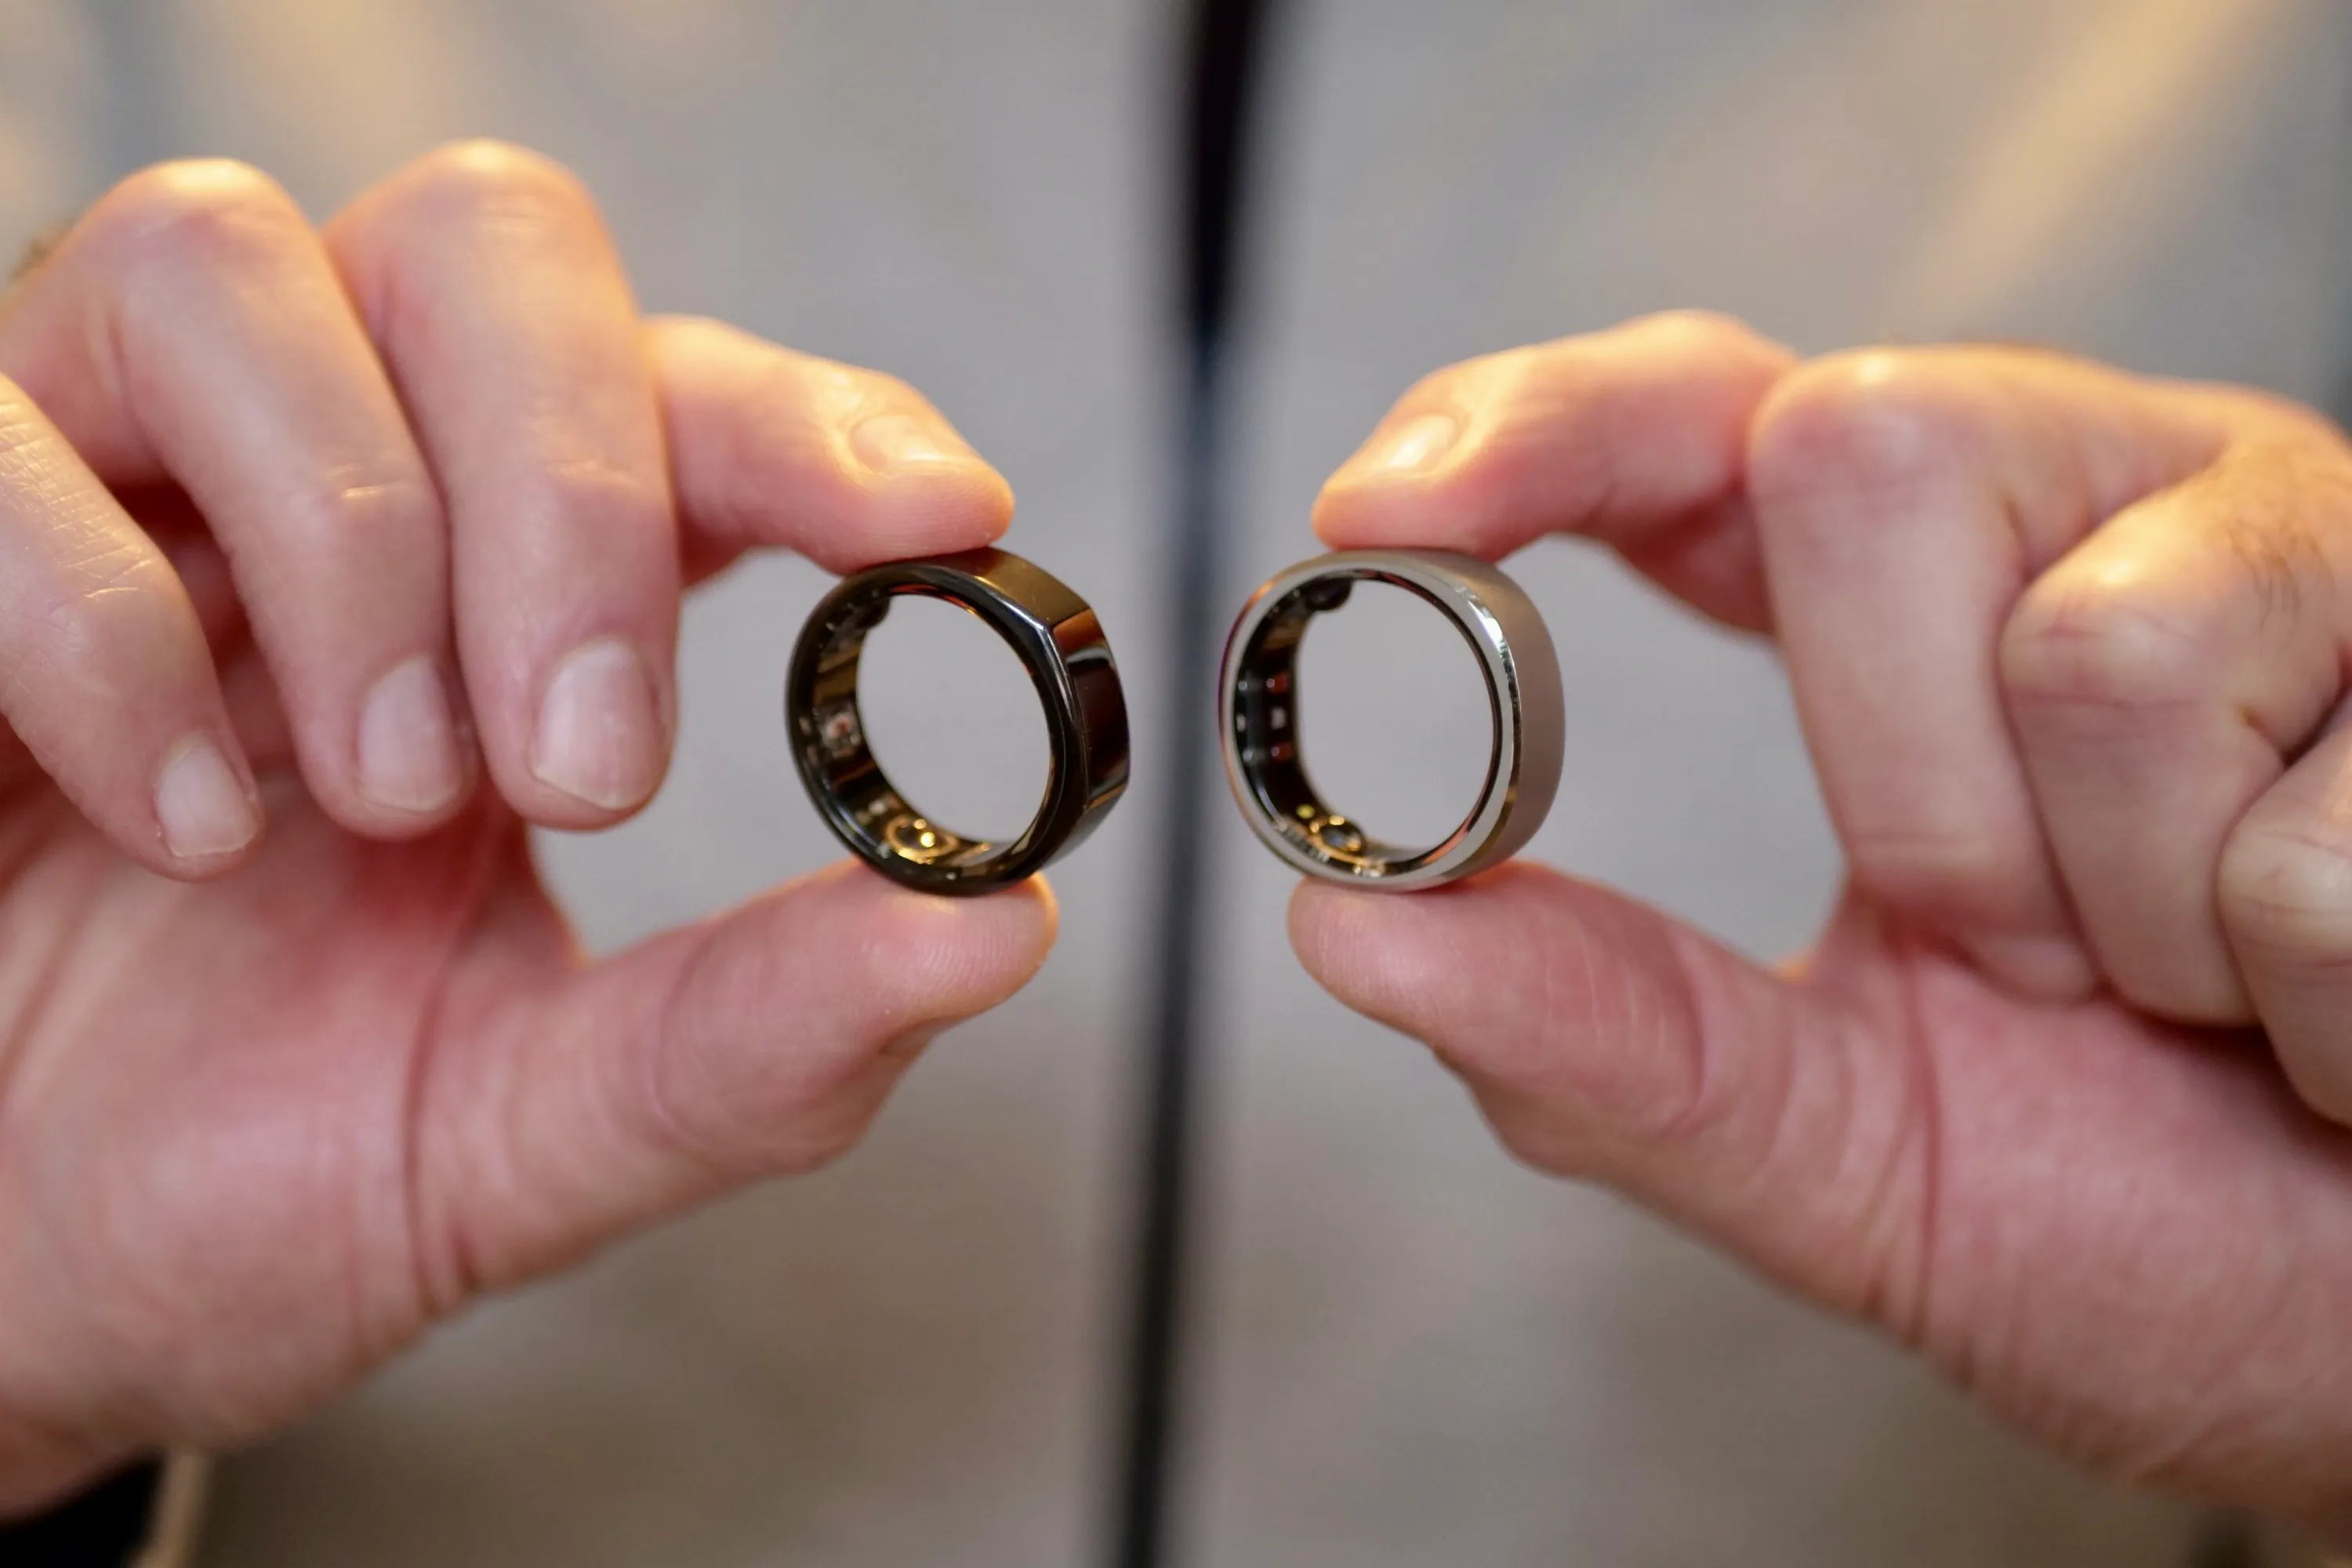 A person holding the RingConn Smart Ring and Oura Ring